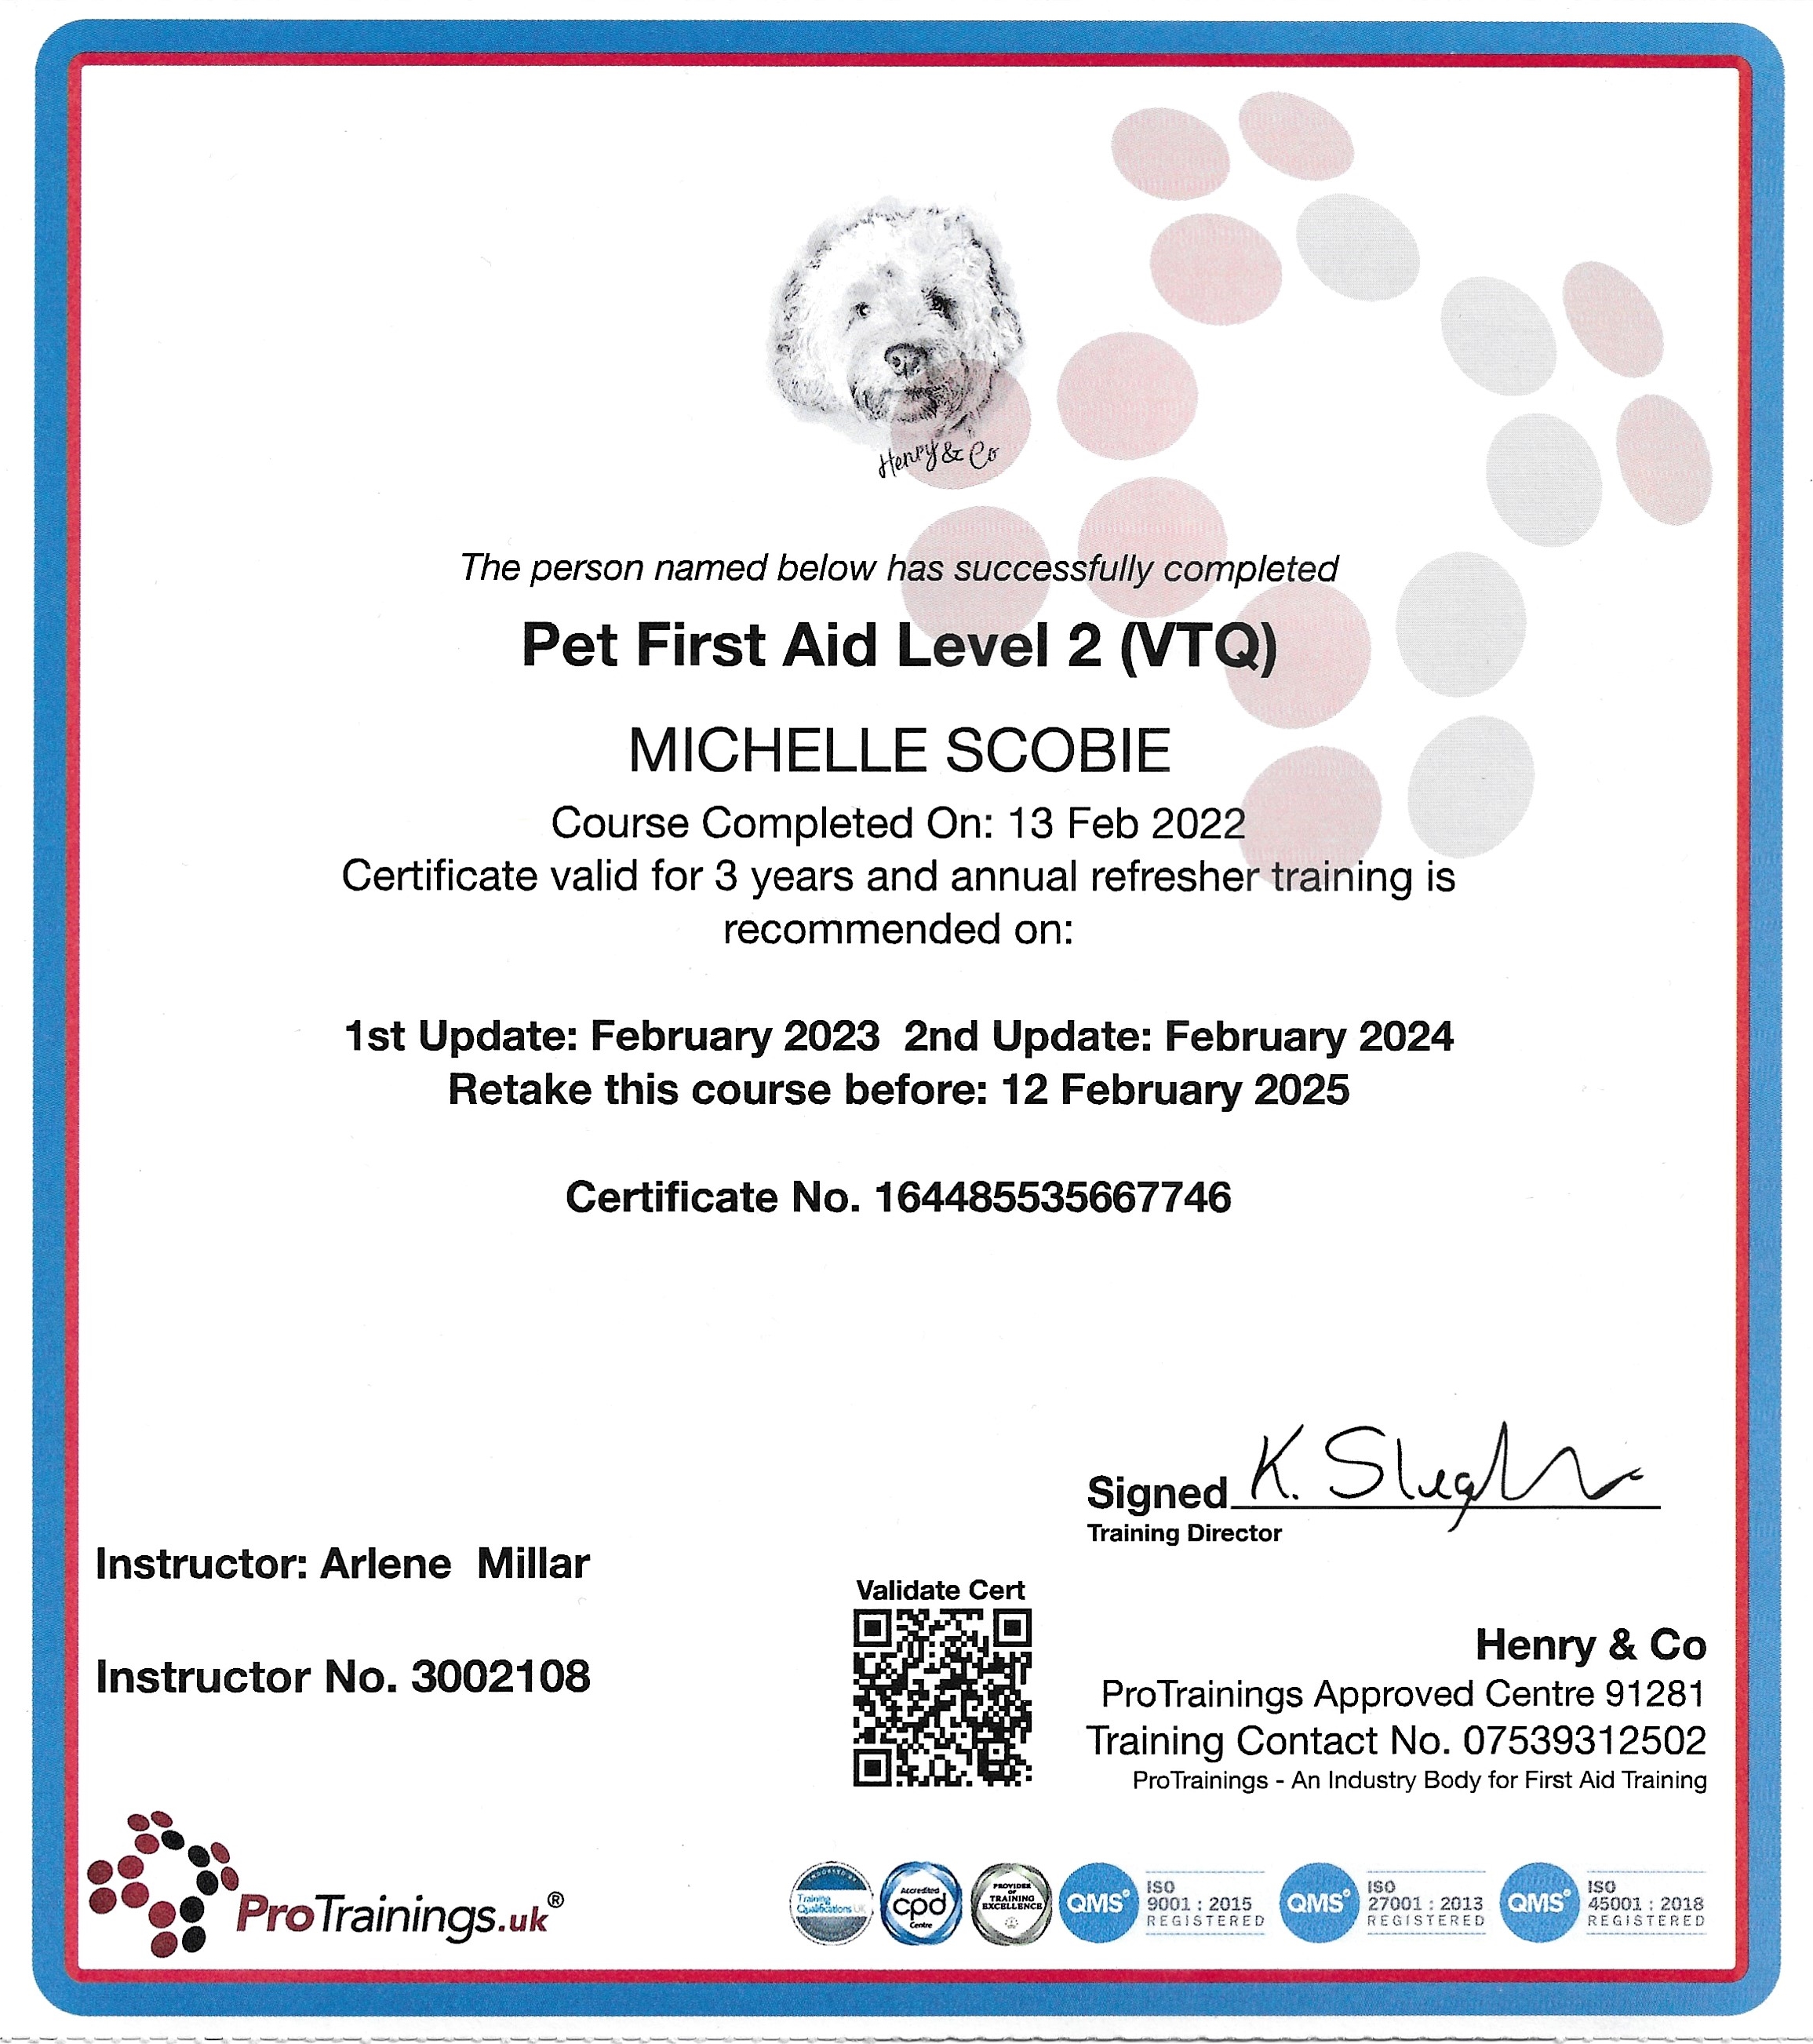 pet first aid certificate for michelle scobie